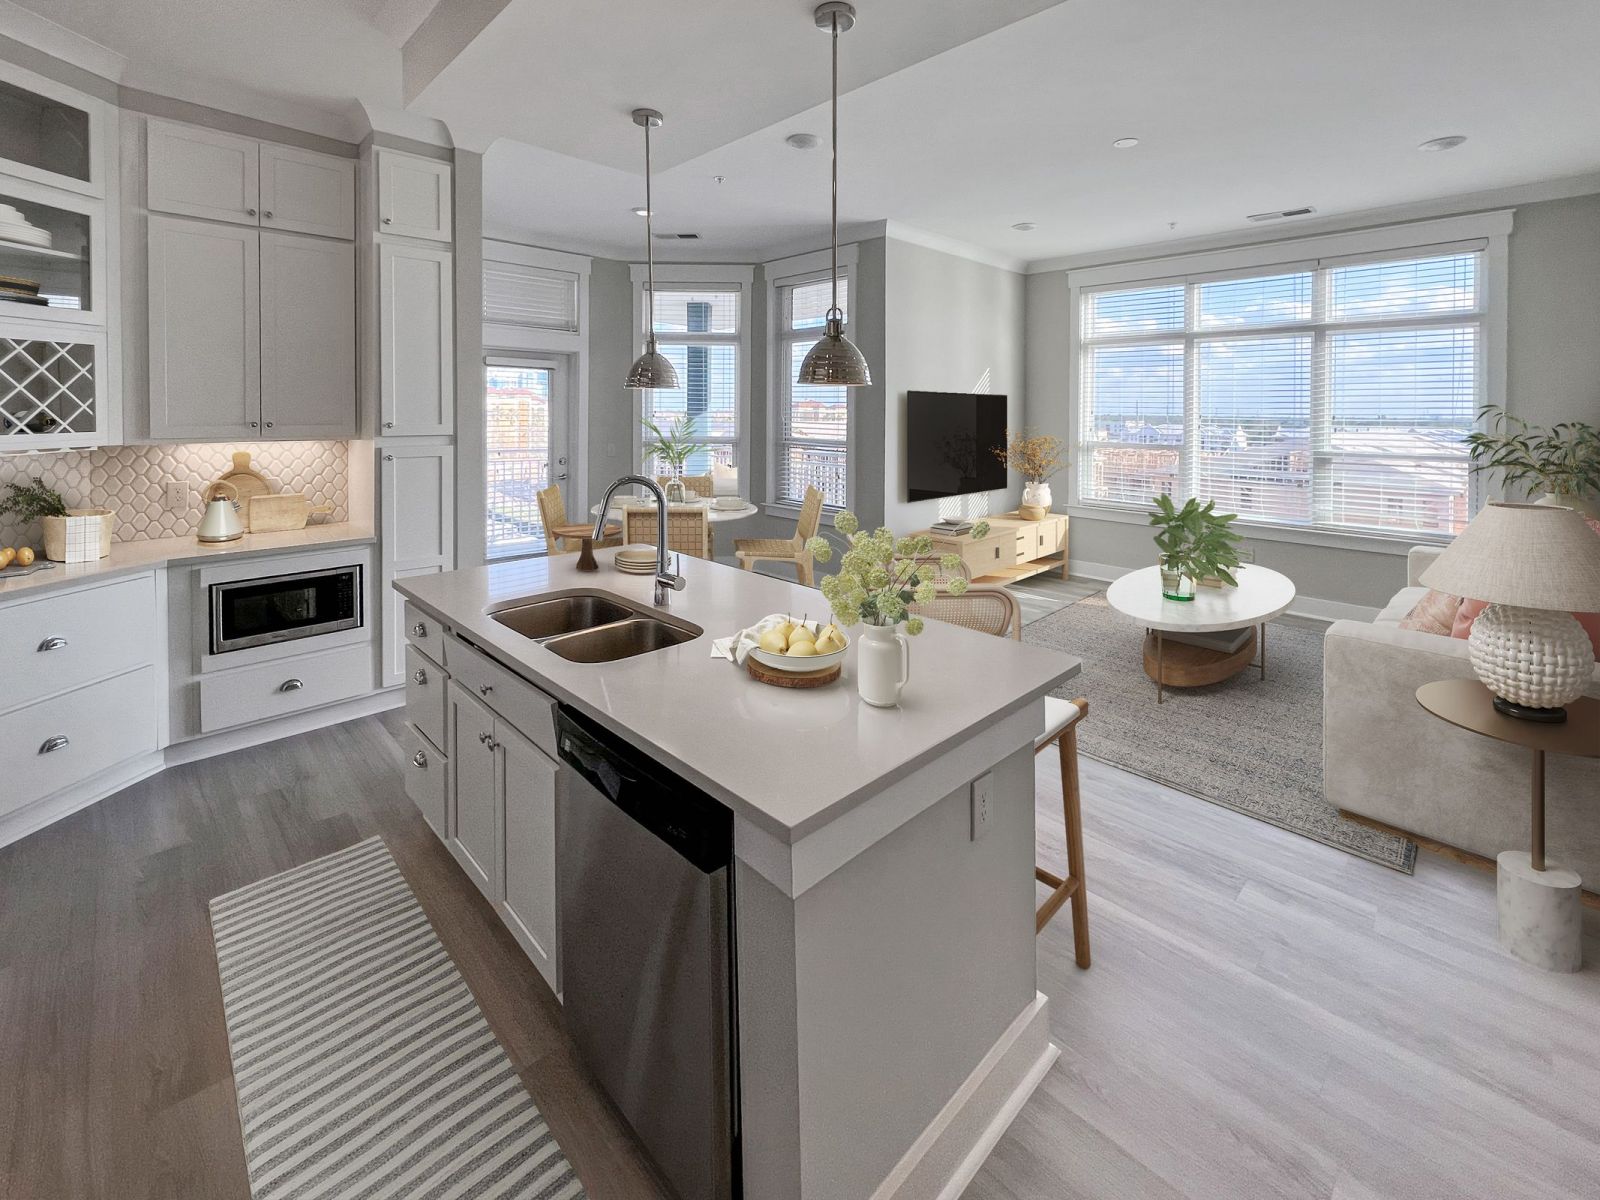 Contemporary kitchen in Solstice Apartments with white cabinetry, a central island, and stainless steel appliances, flowing into a brightly lit living area.